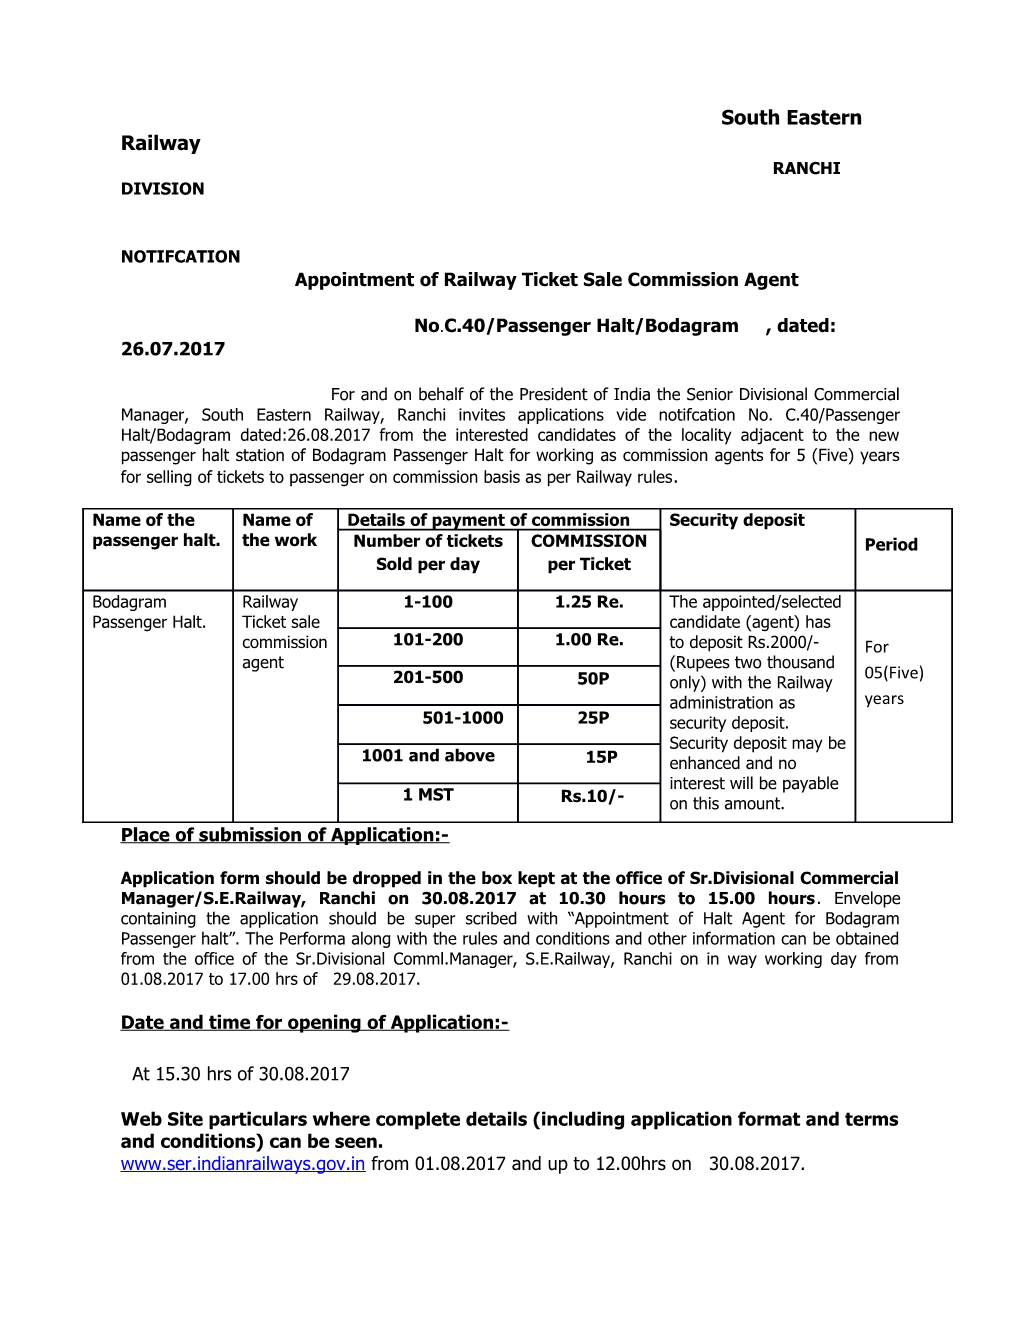 Appointment of Railway Ticket Sale Commission Agent